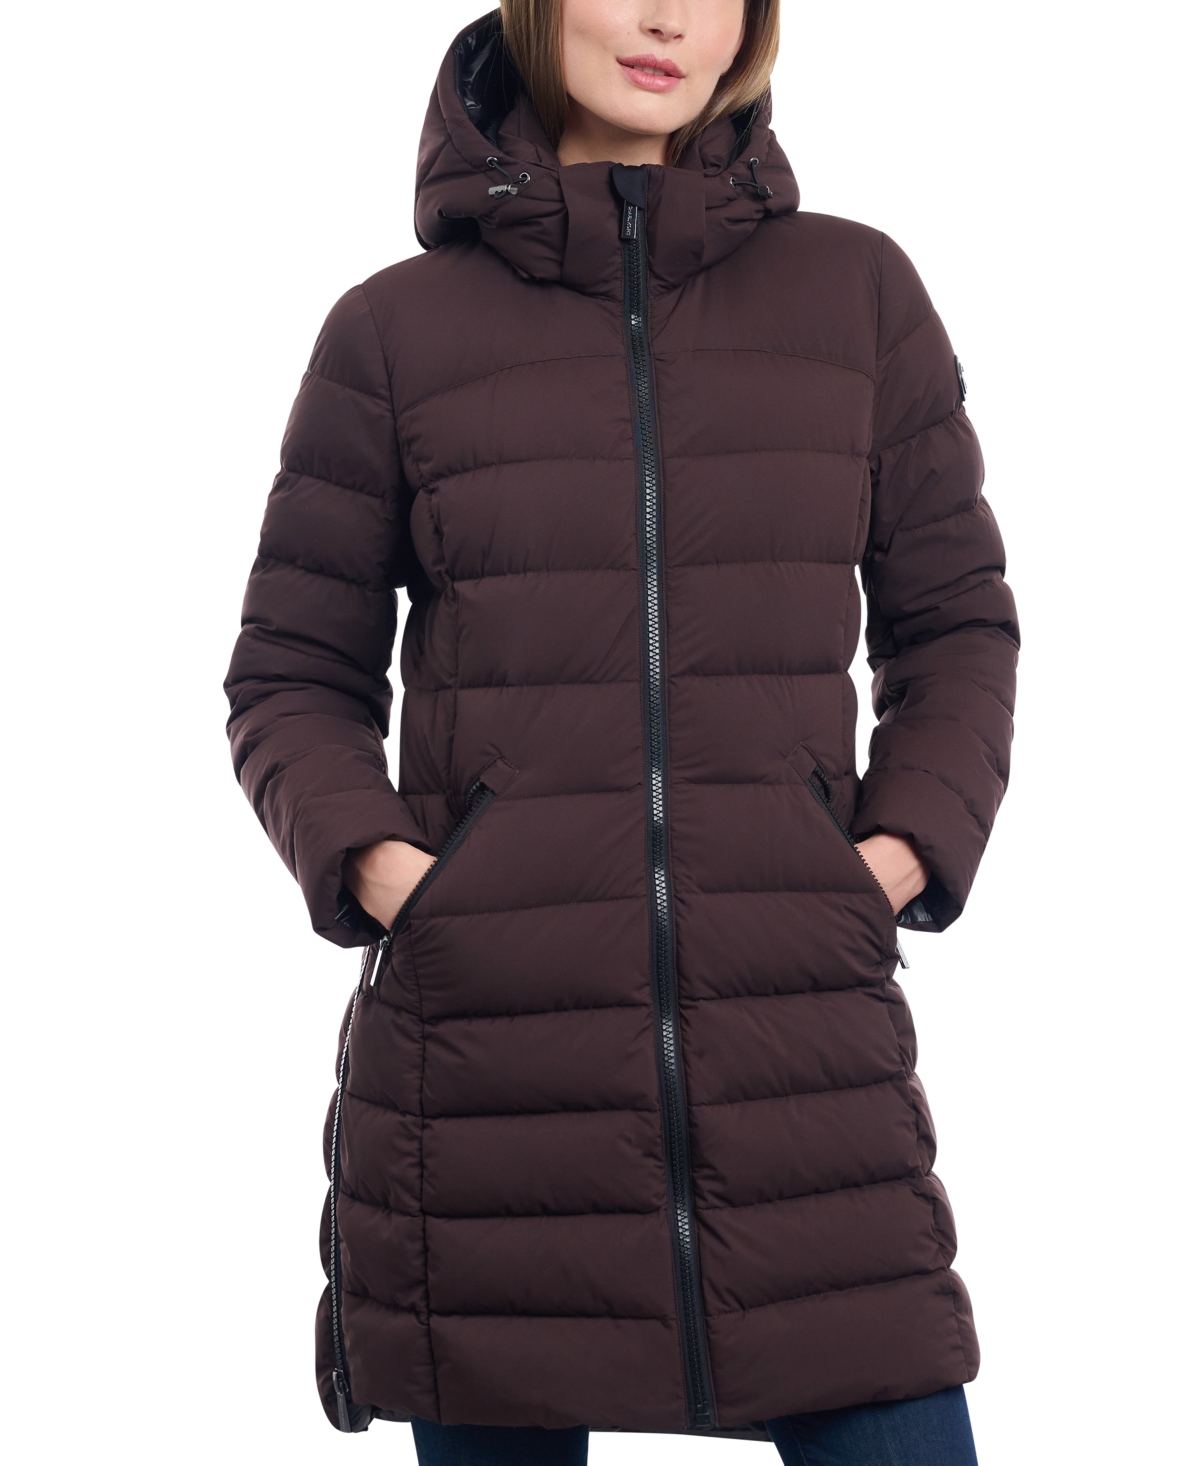 Michael Michael Kors Women's Petite Hooded Faux-Leather-Trim Puffer Coat, Created for Macy's - Chocolate